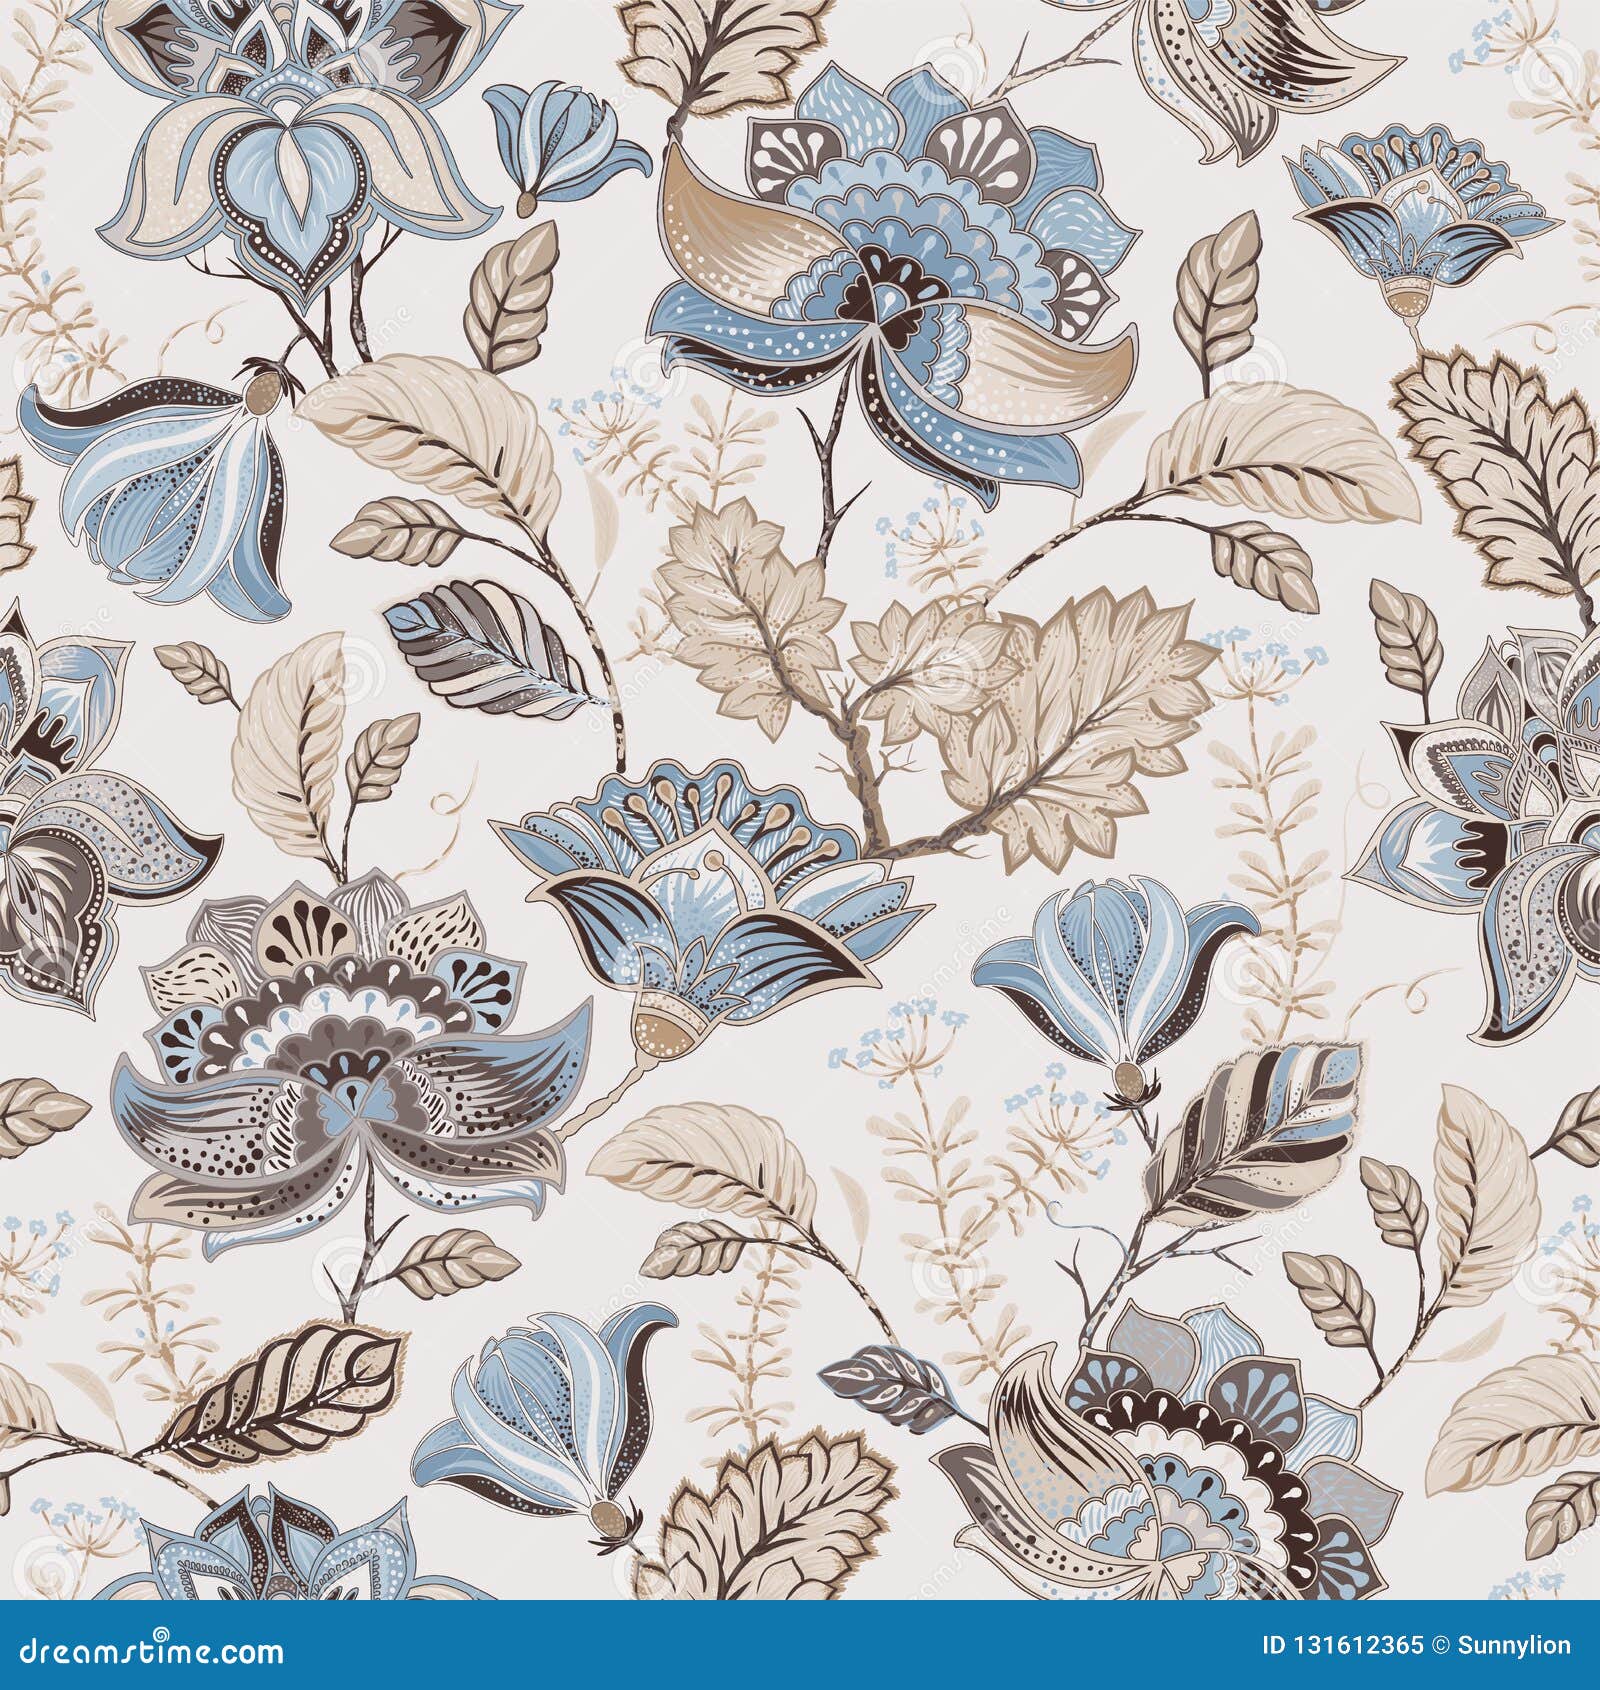  seamless pattern. indian floral ornament. colorful decorative wallpaper. paisley and plants.  